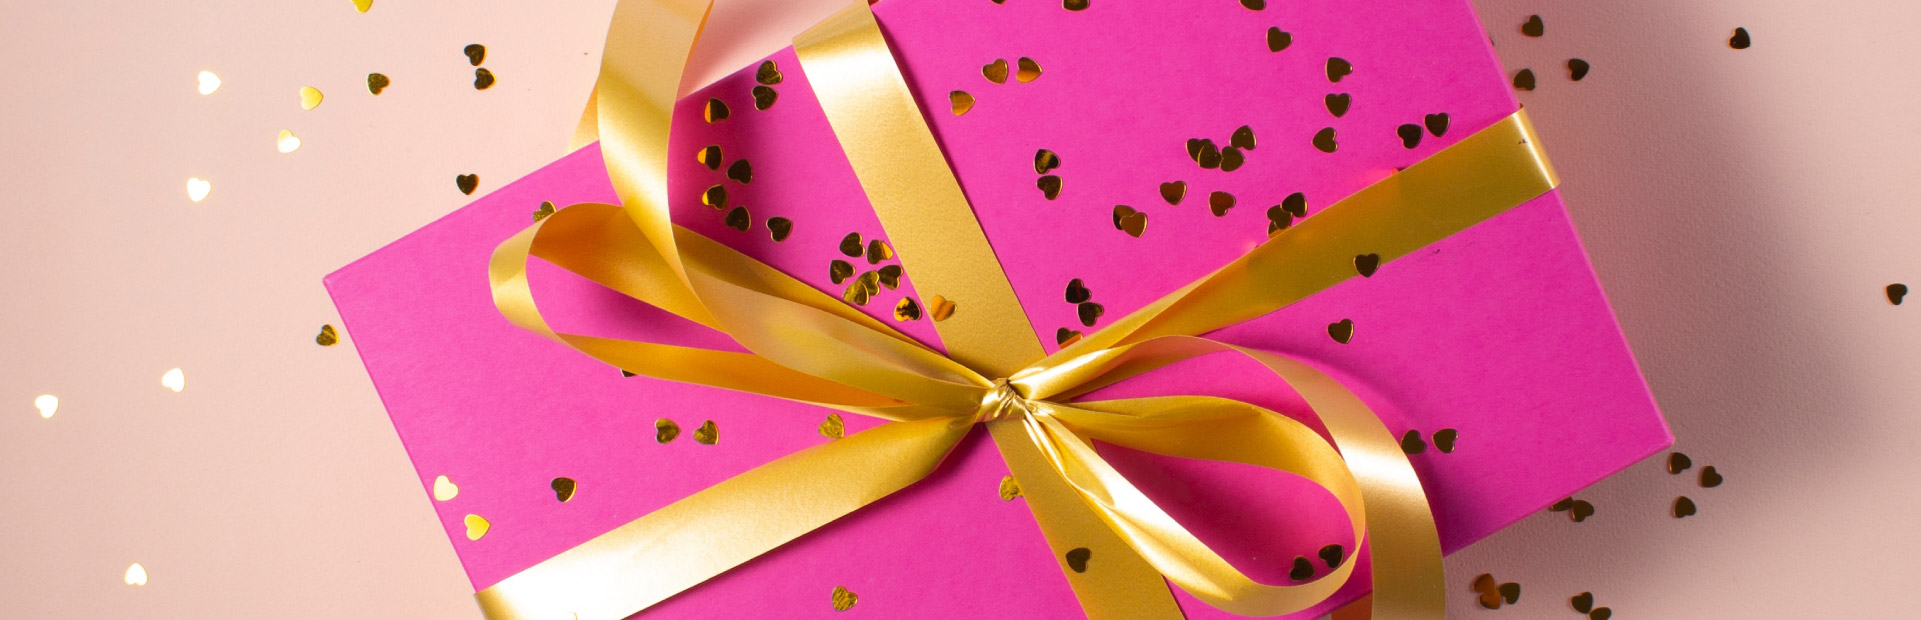 48 Birthday Gift Ideas For Anyone on Your List | The Dating Divas